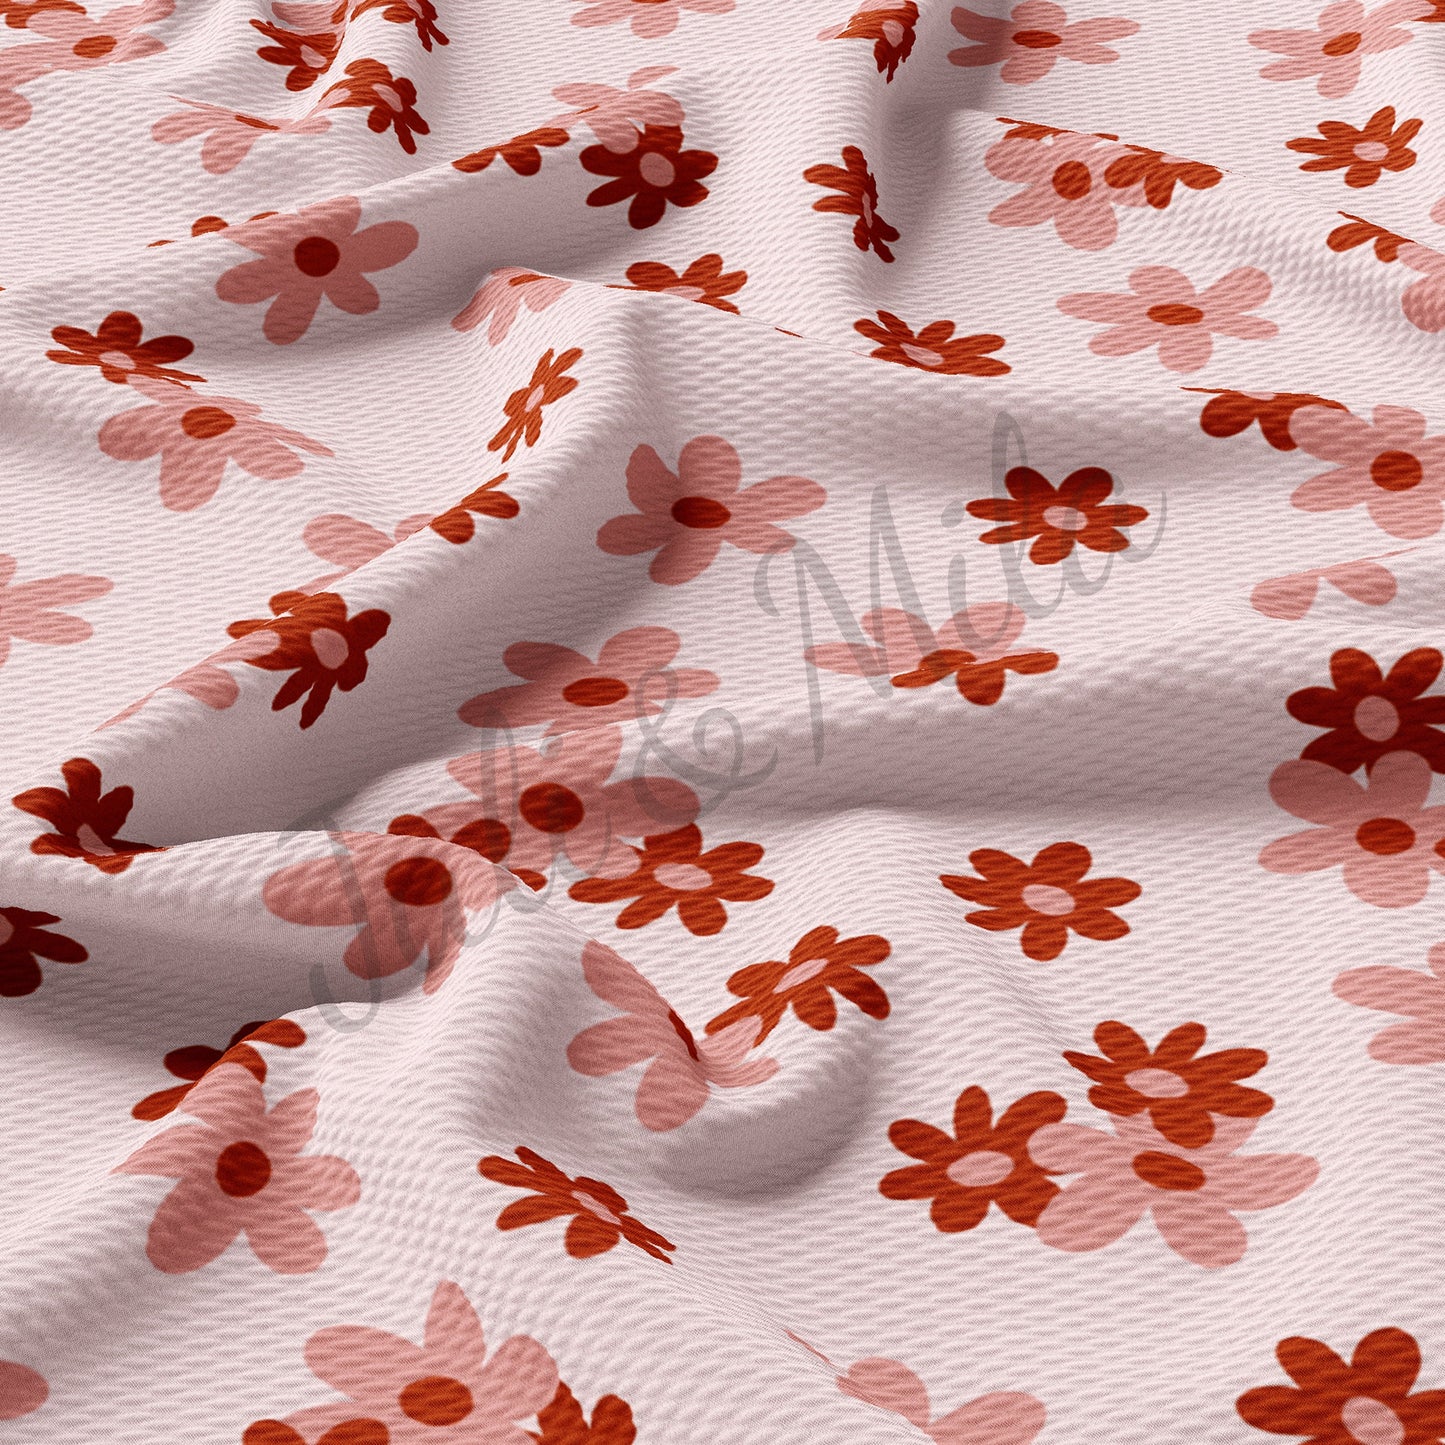 Valentines Day Bullet Textured Fabric  Floral111